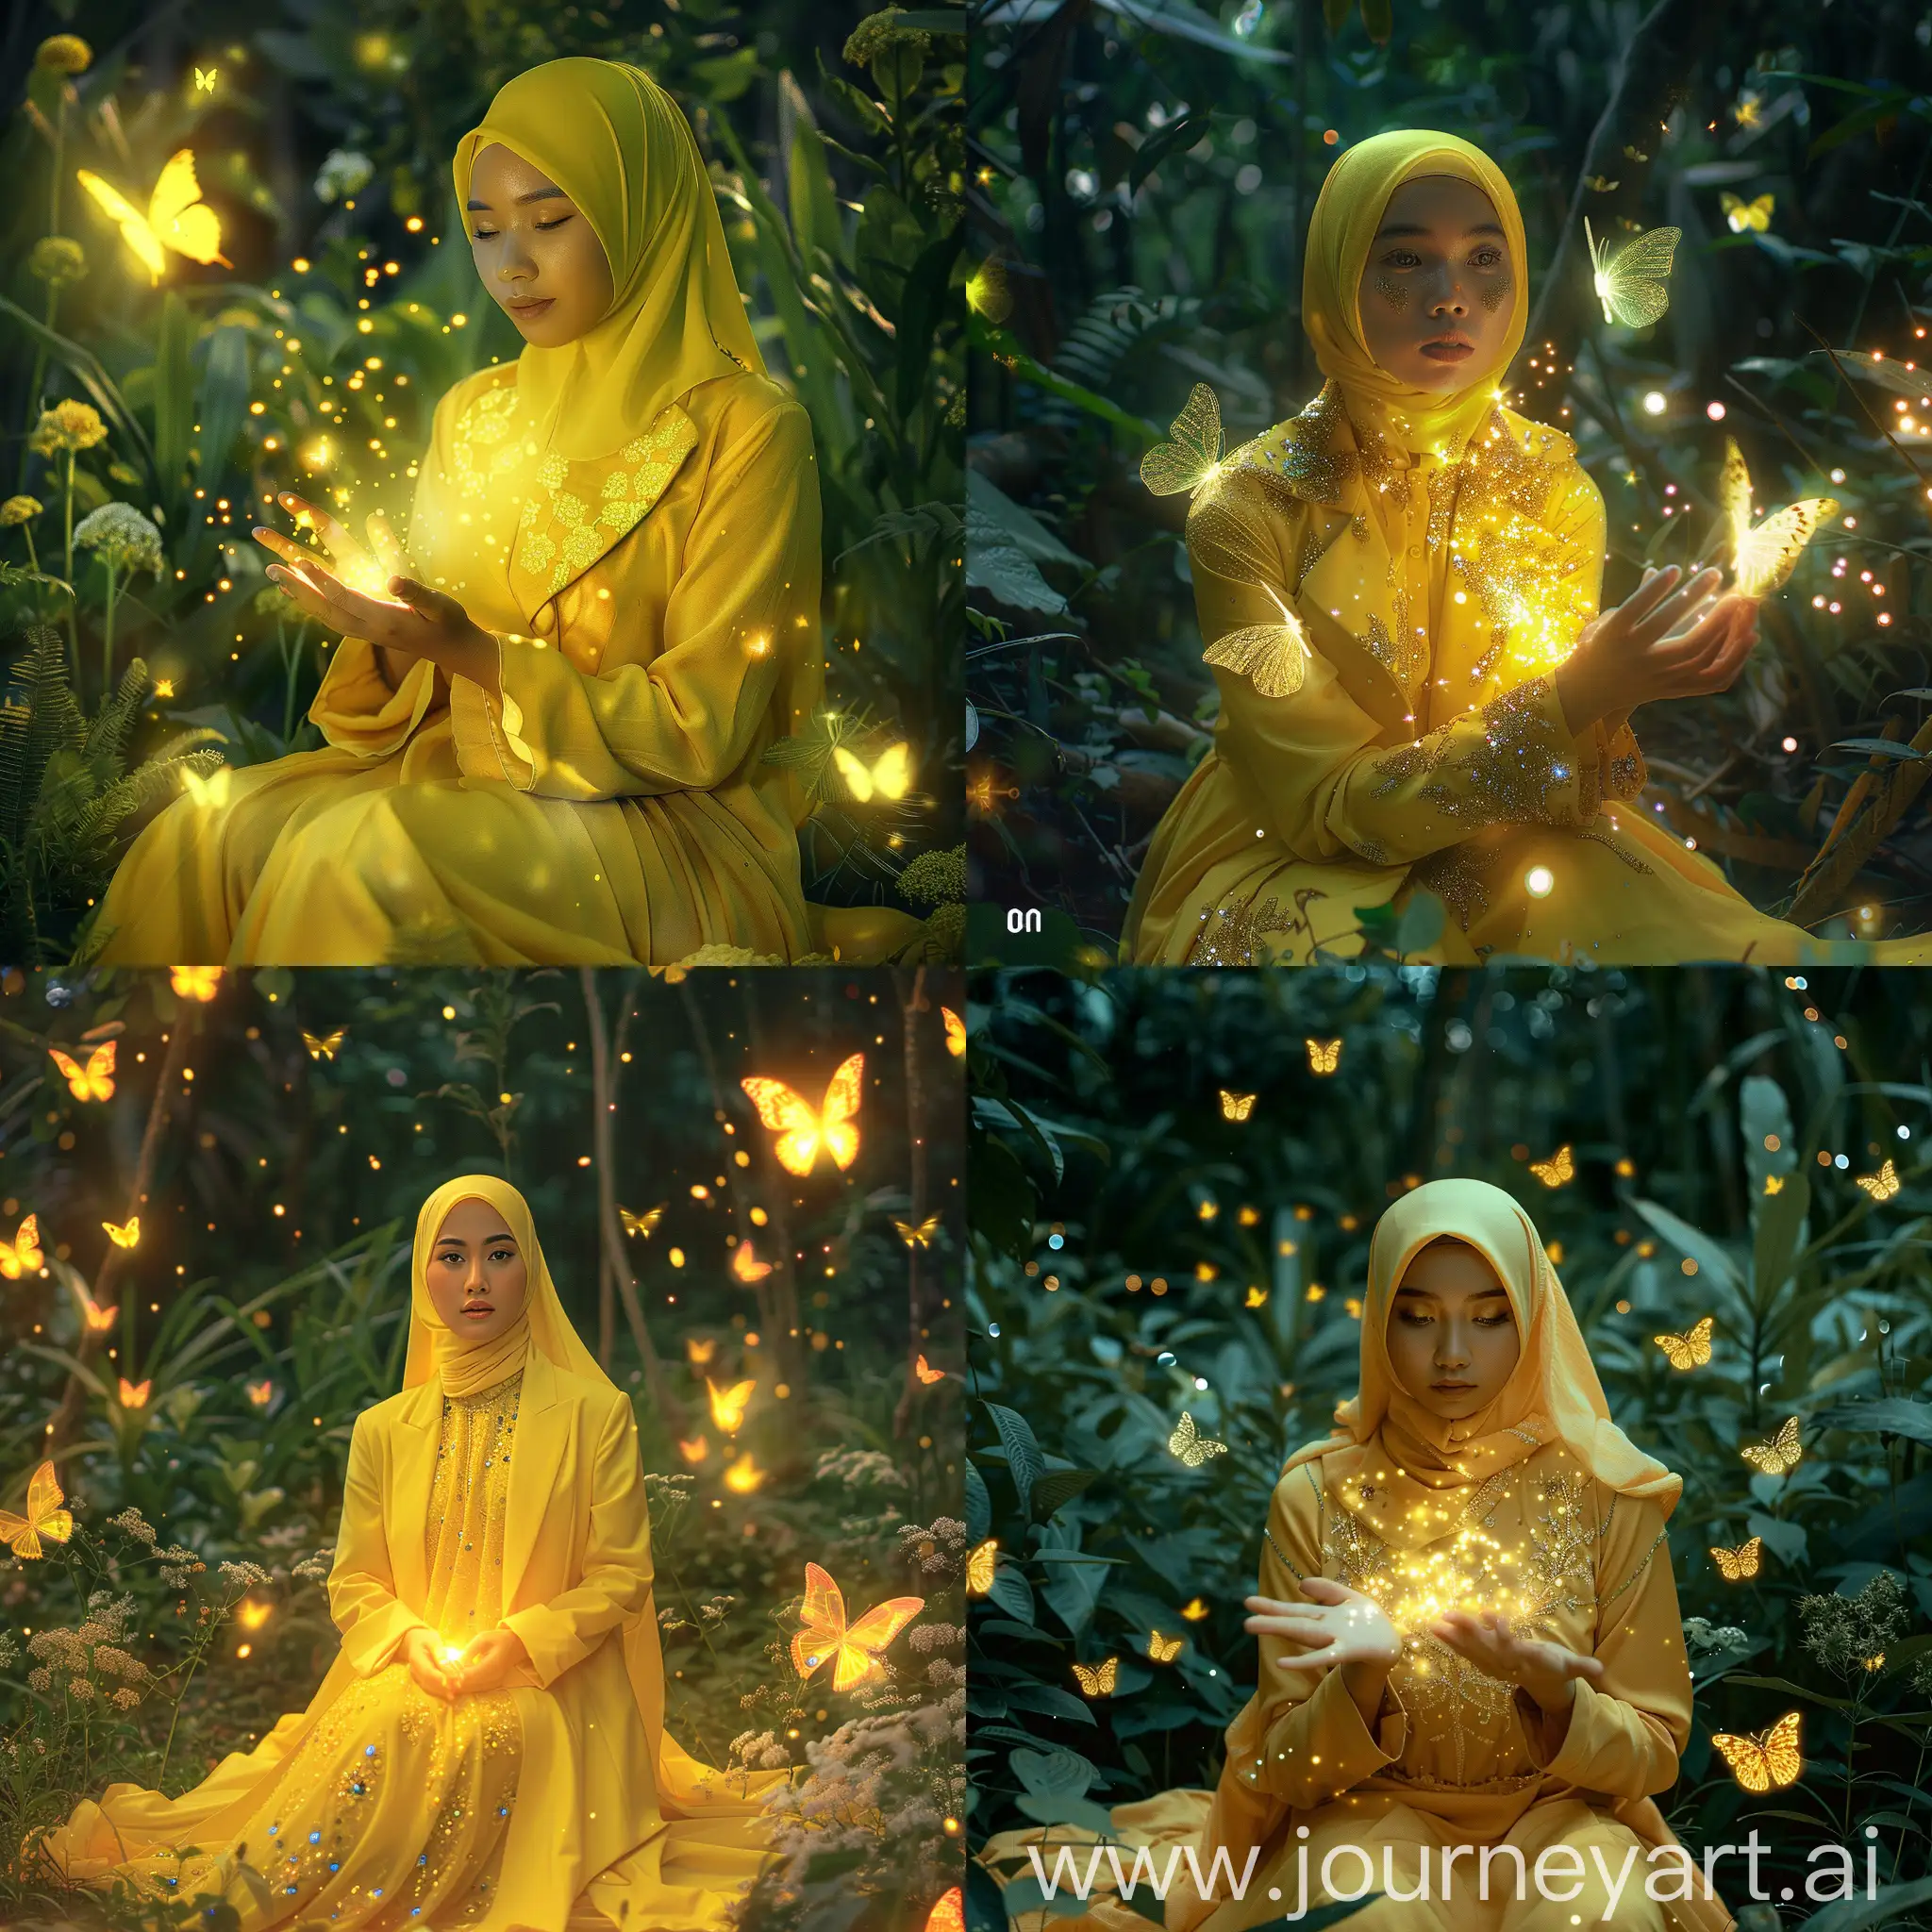 Elegant-Indonesian-Woman-in-Yellow-Attire-Surrounded-by-Glowing-Butterflies-and-Fireflies-in-Garden-at-Night